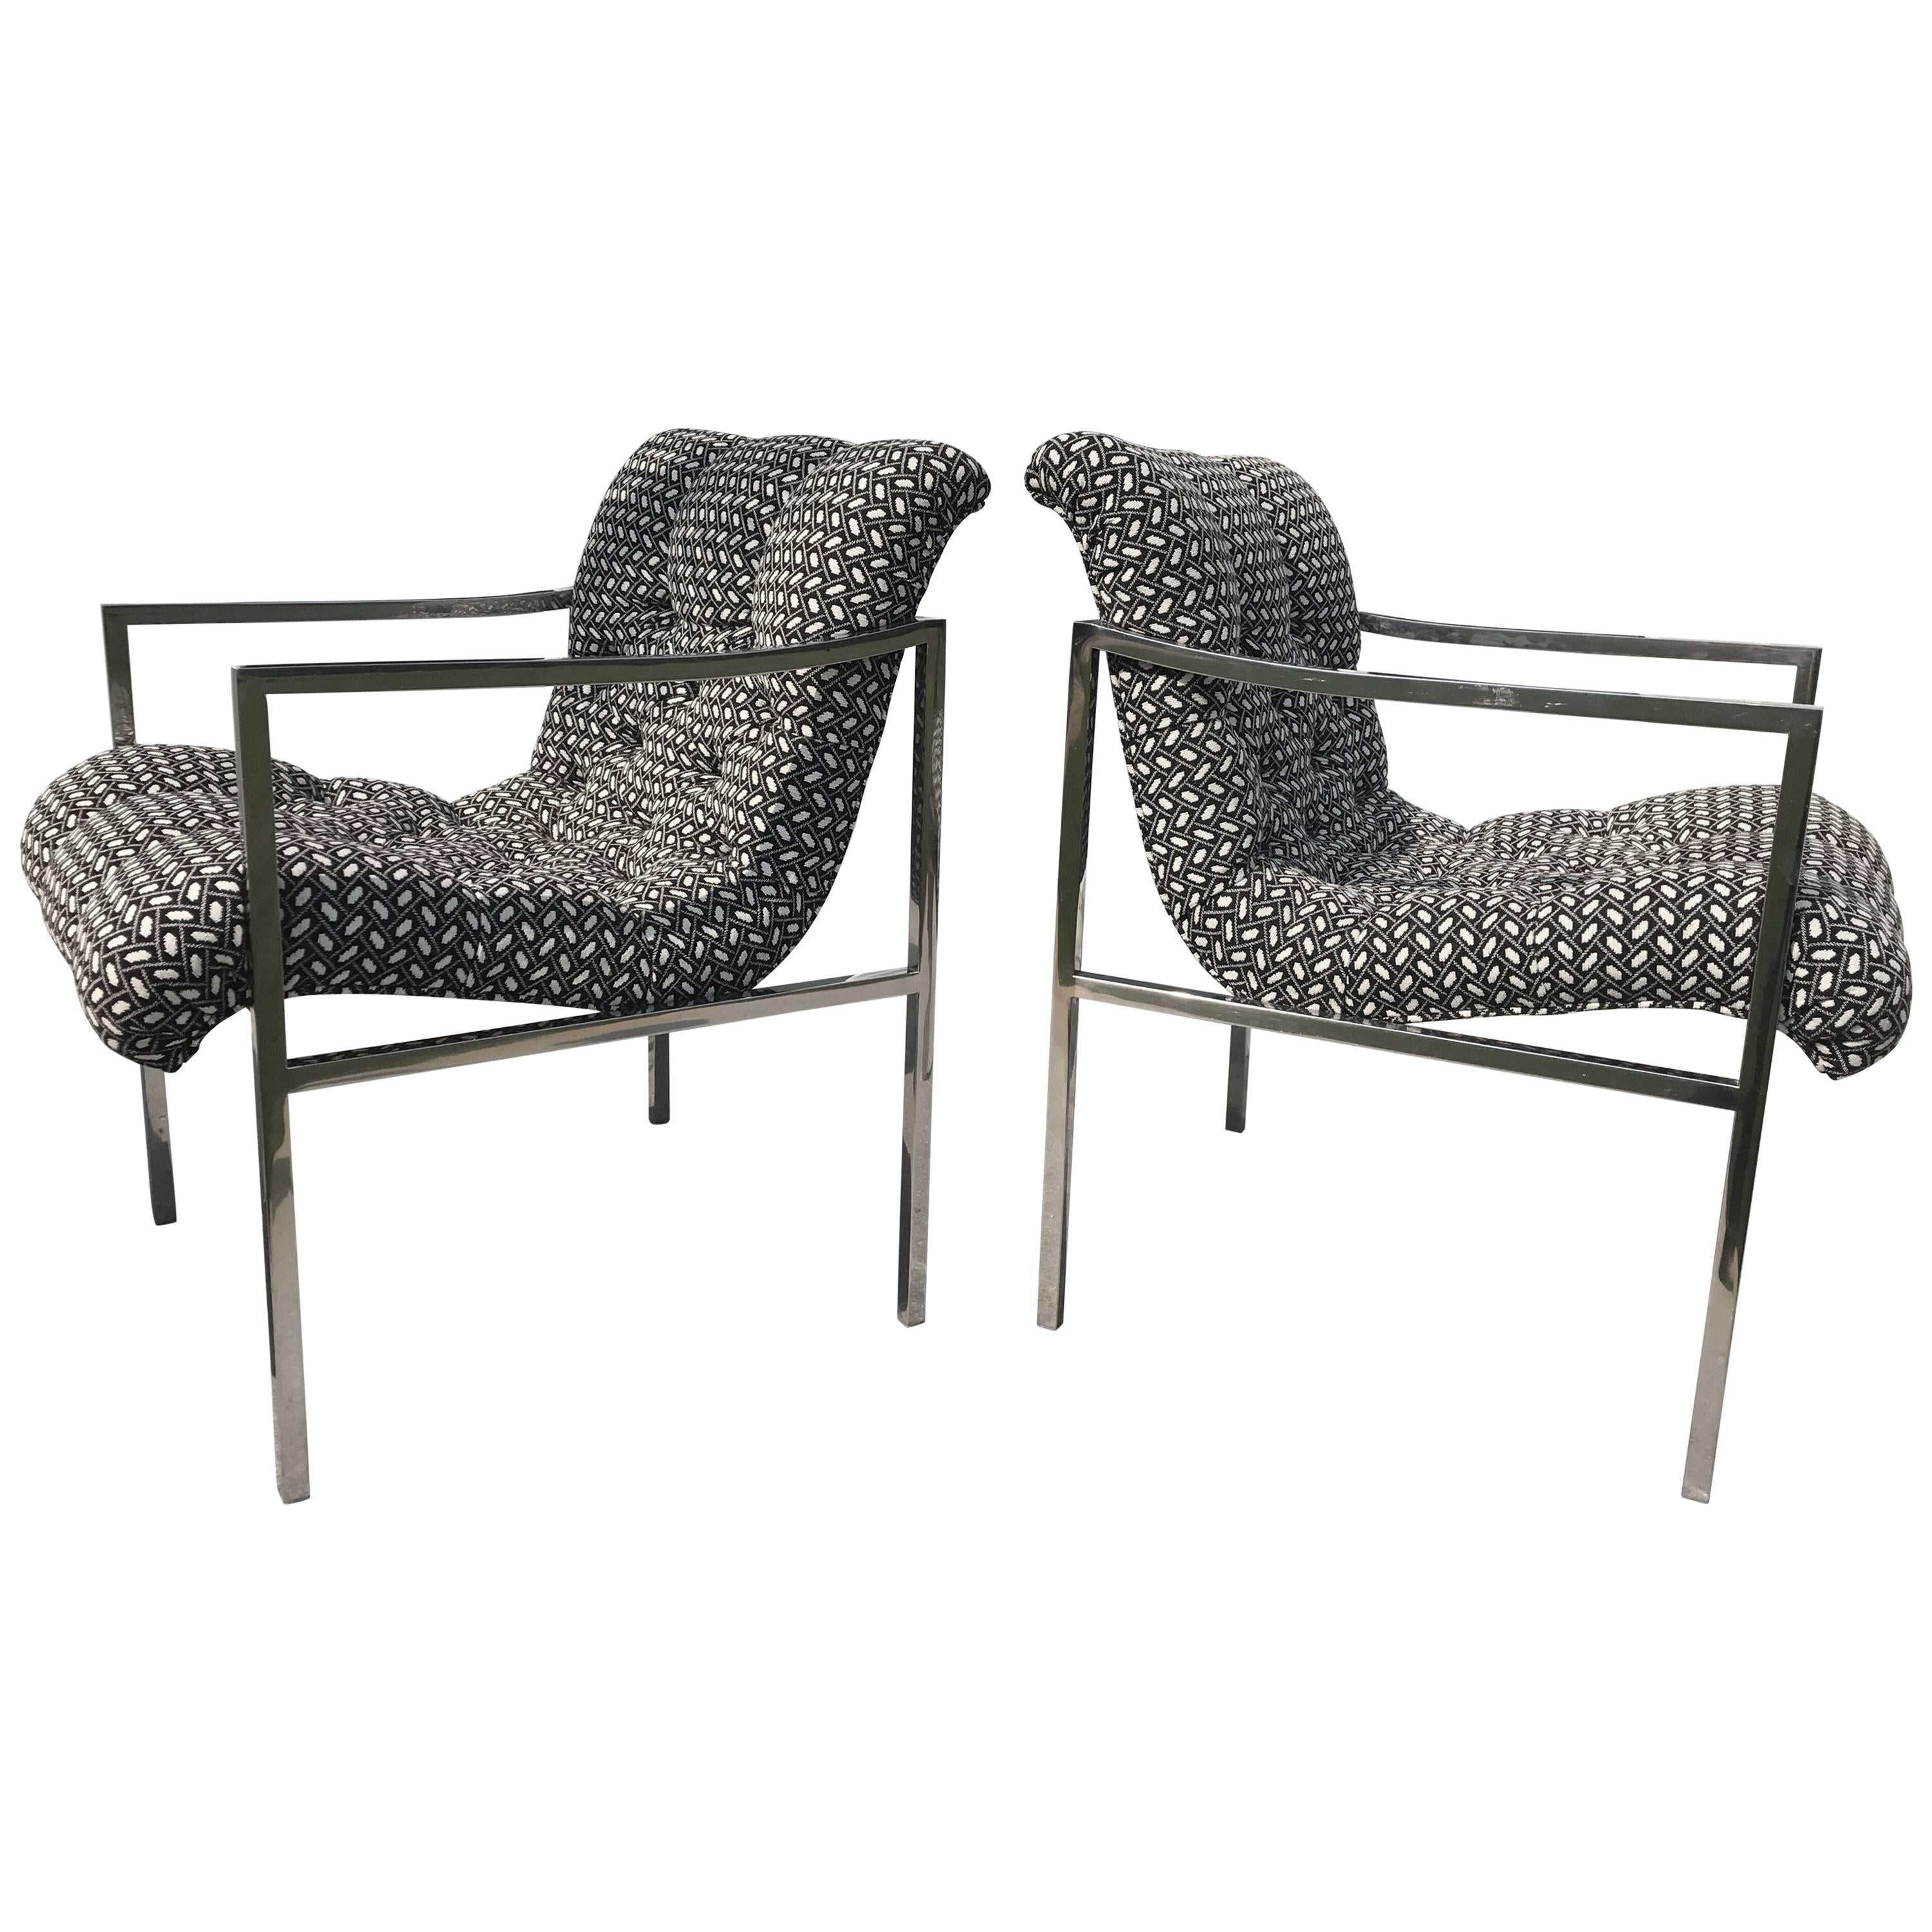 Stow & Davis Scoop Chairs in a Black and White Uphlstery For Sale